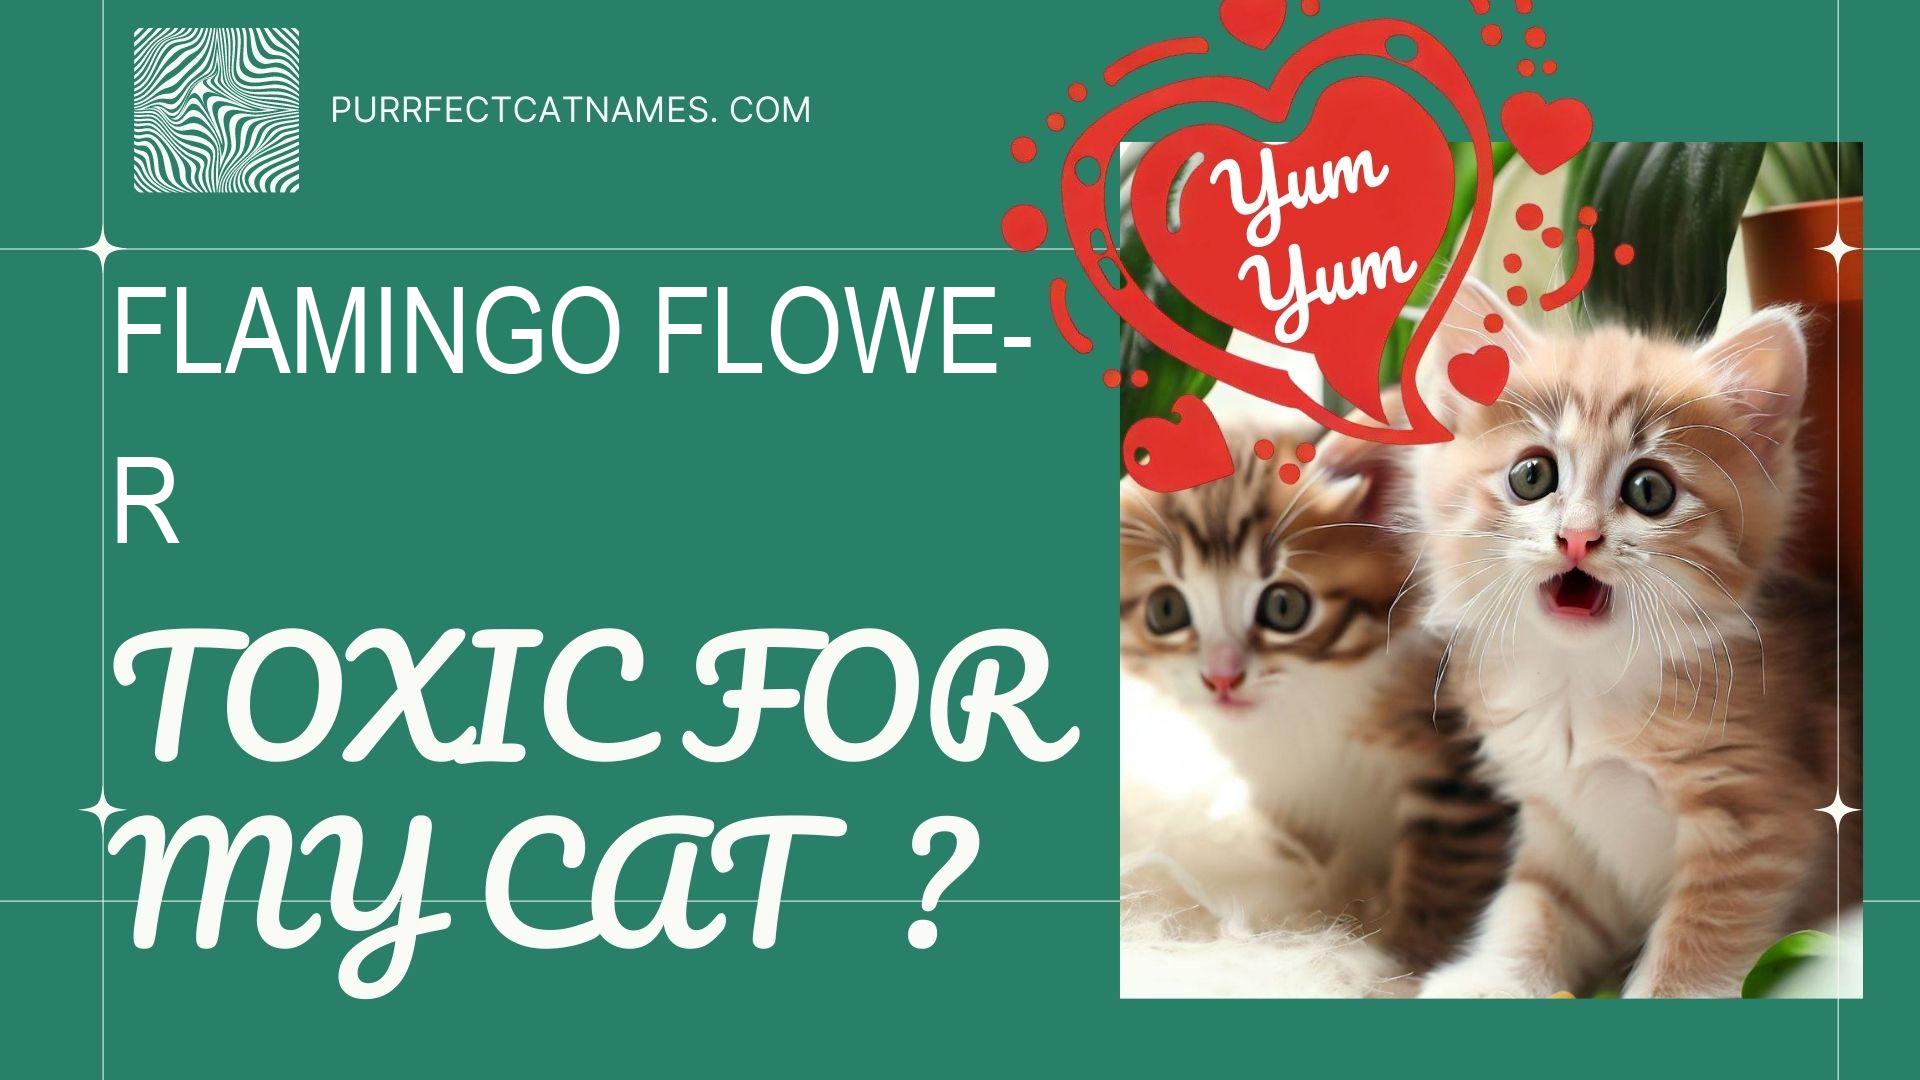 IsFlamingo Flower plant toxic for your cat